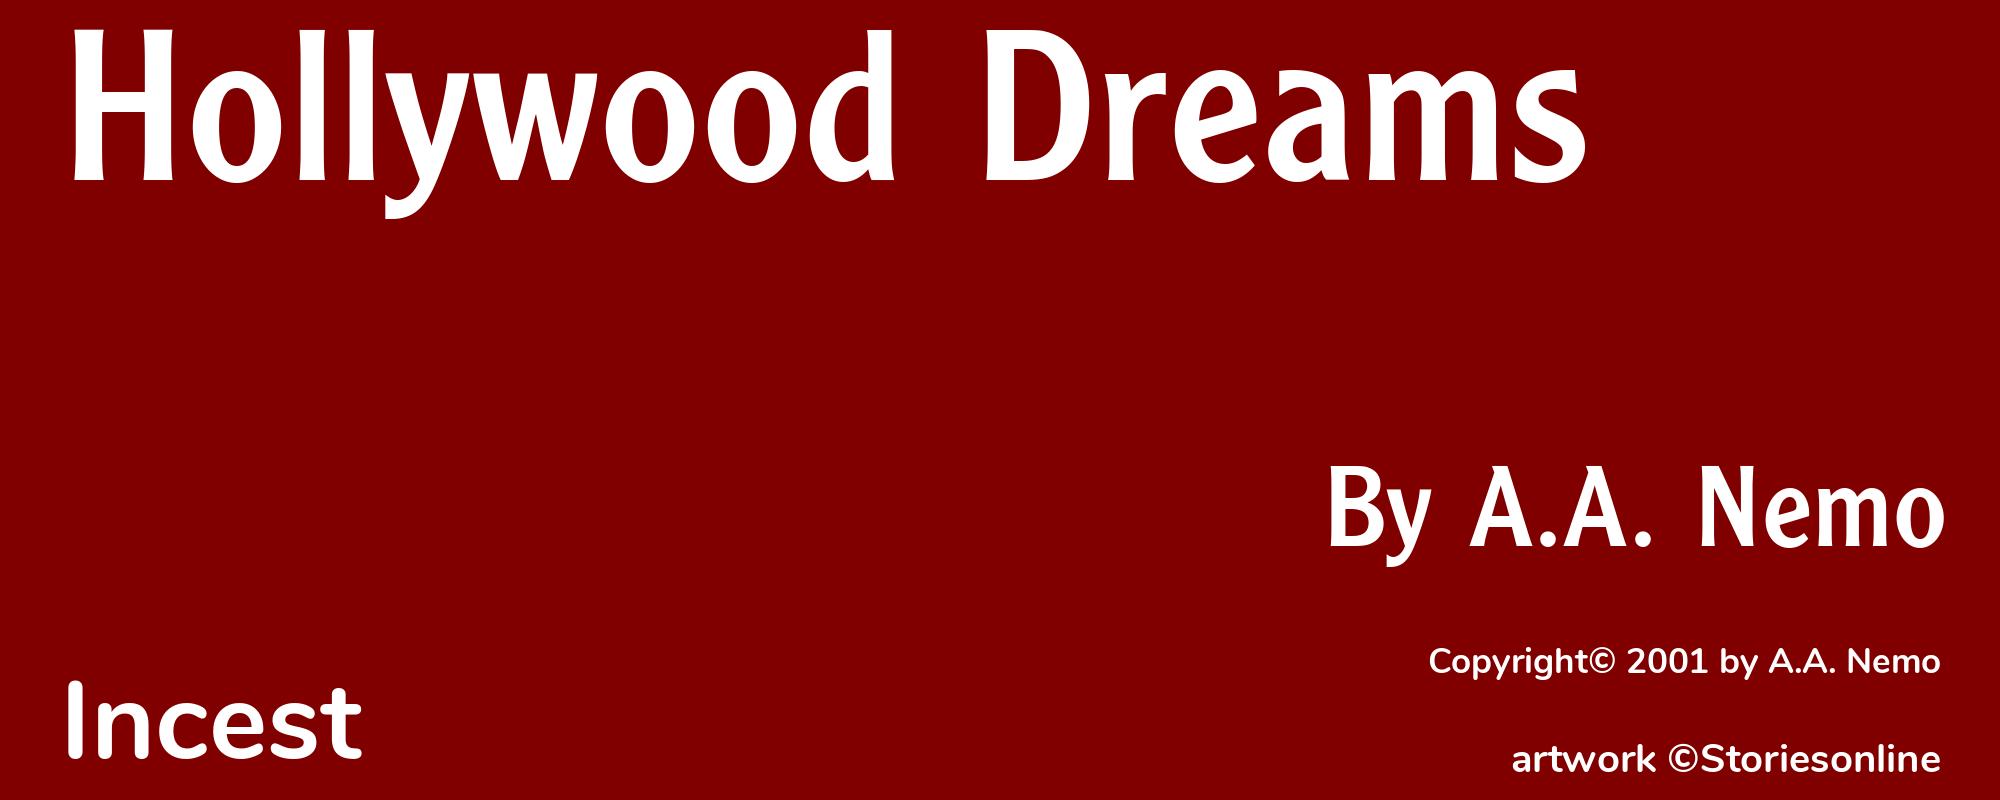 Hollywood Dreams - Cover